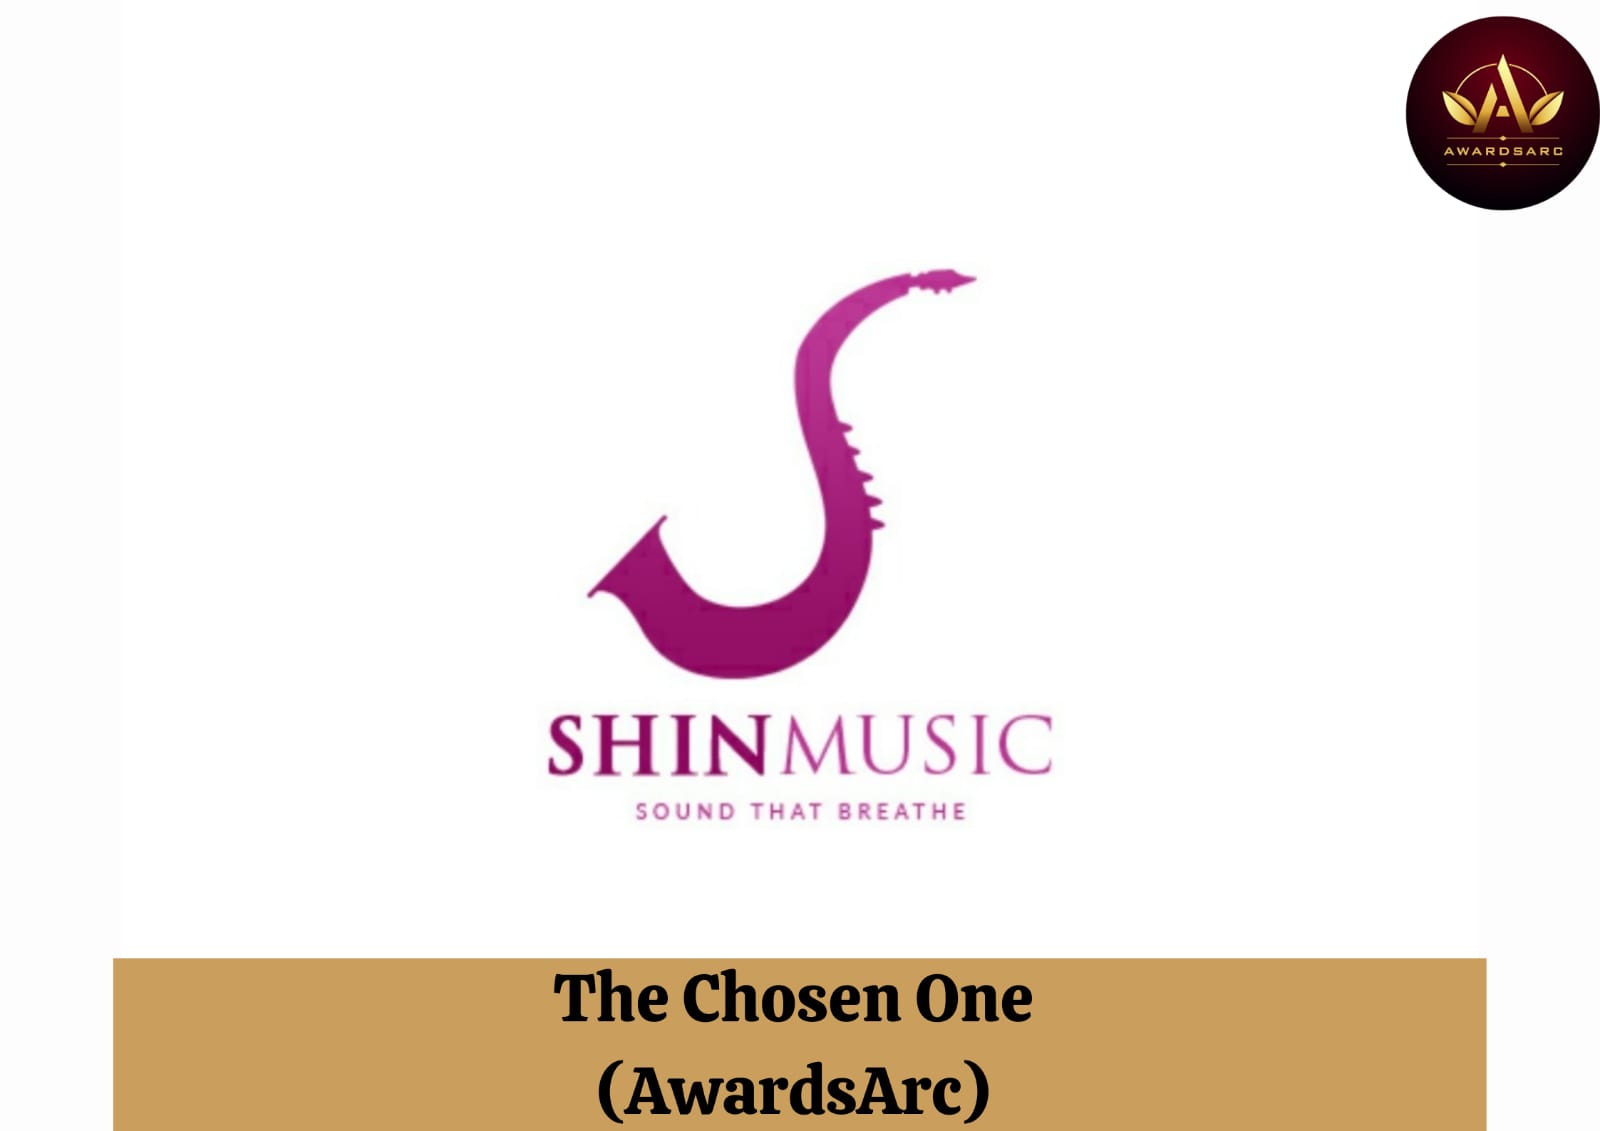 Record Label Shin Music makes it to be one of THE CHOSEN ONES by AwardsArc.